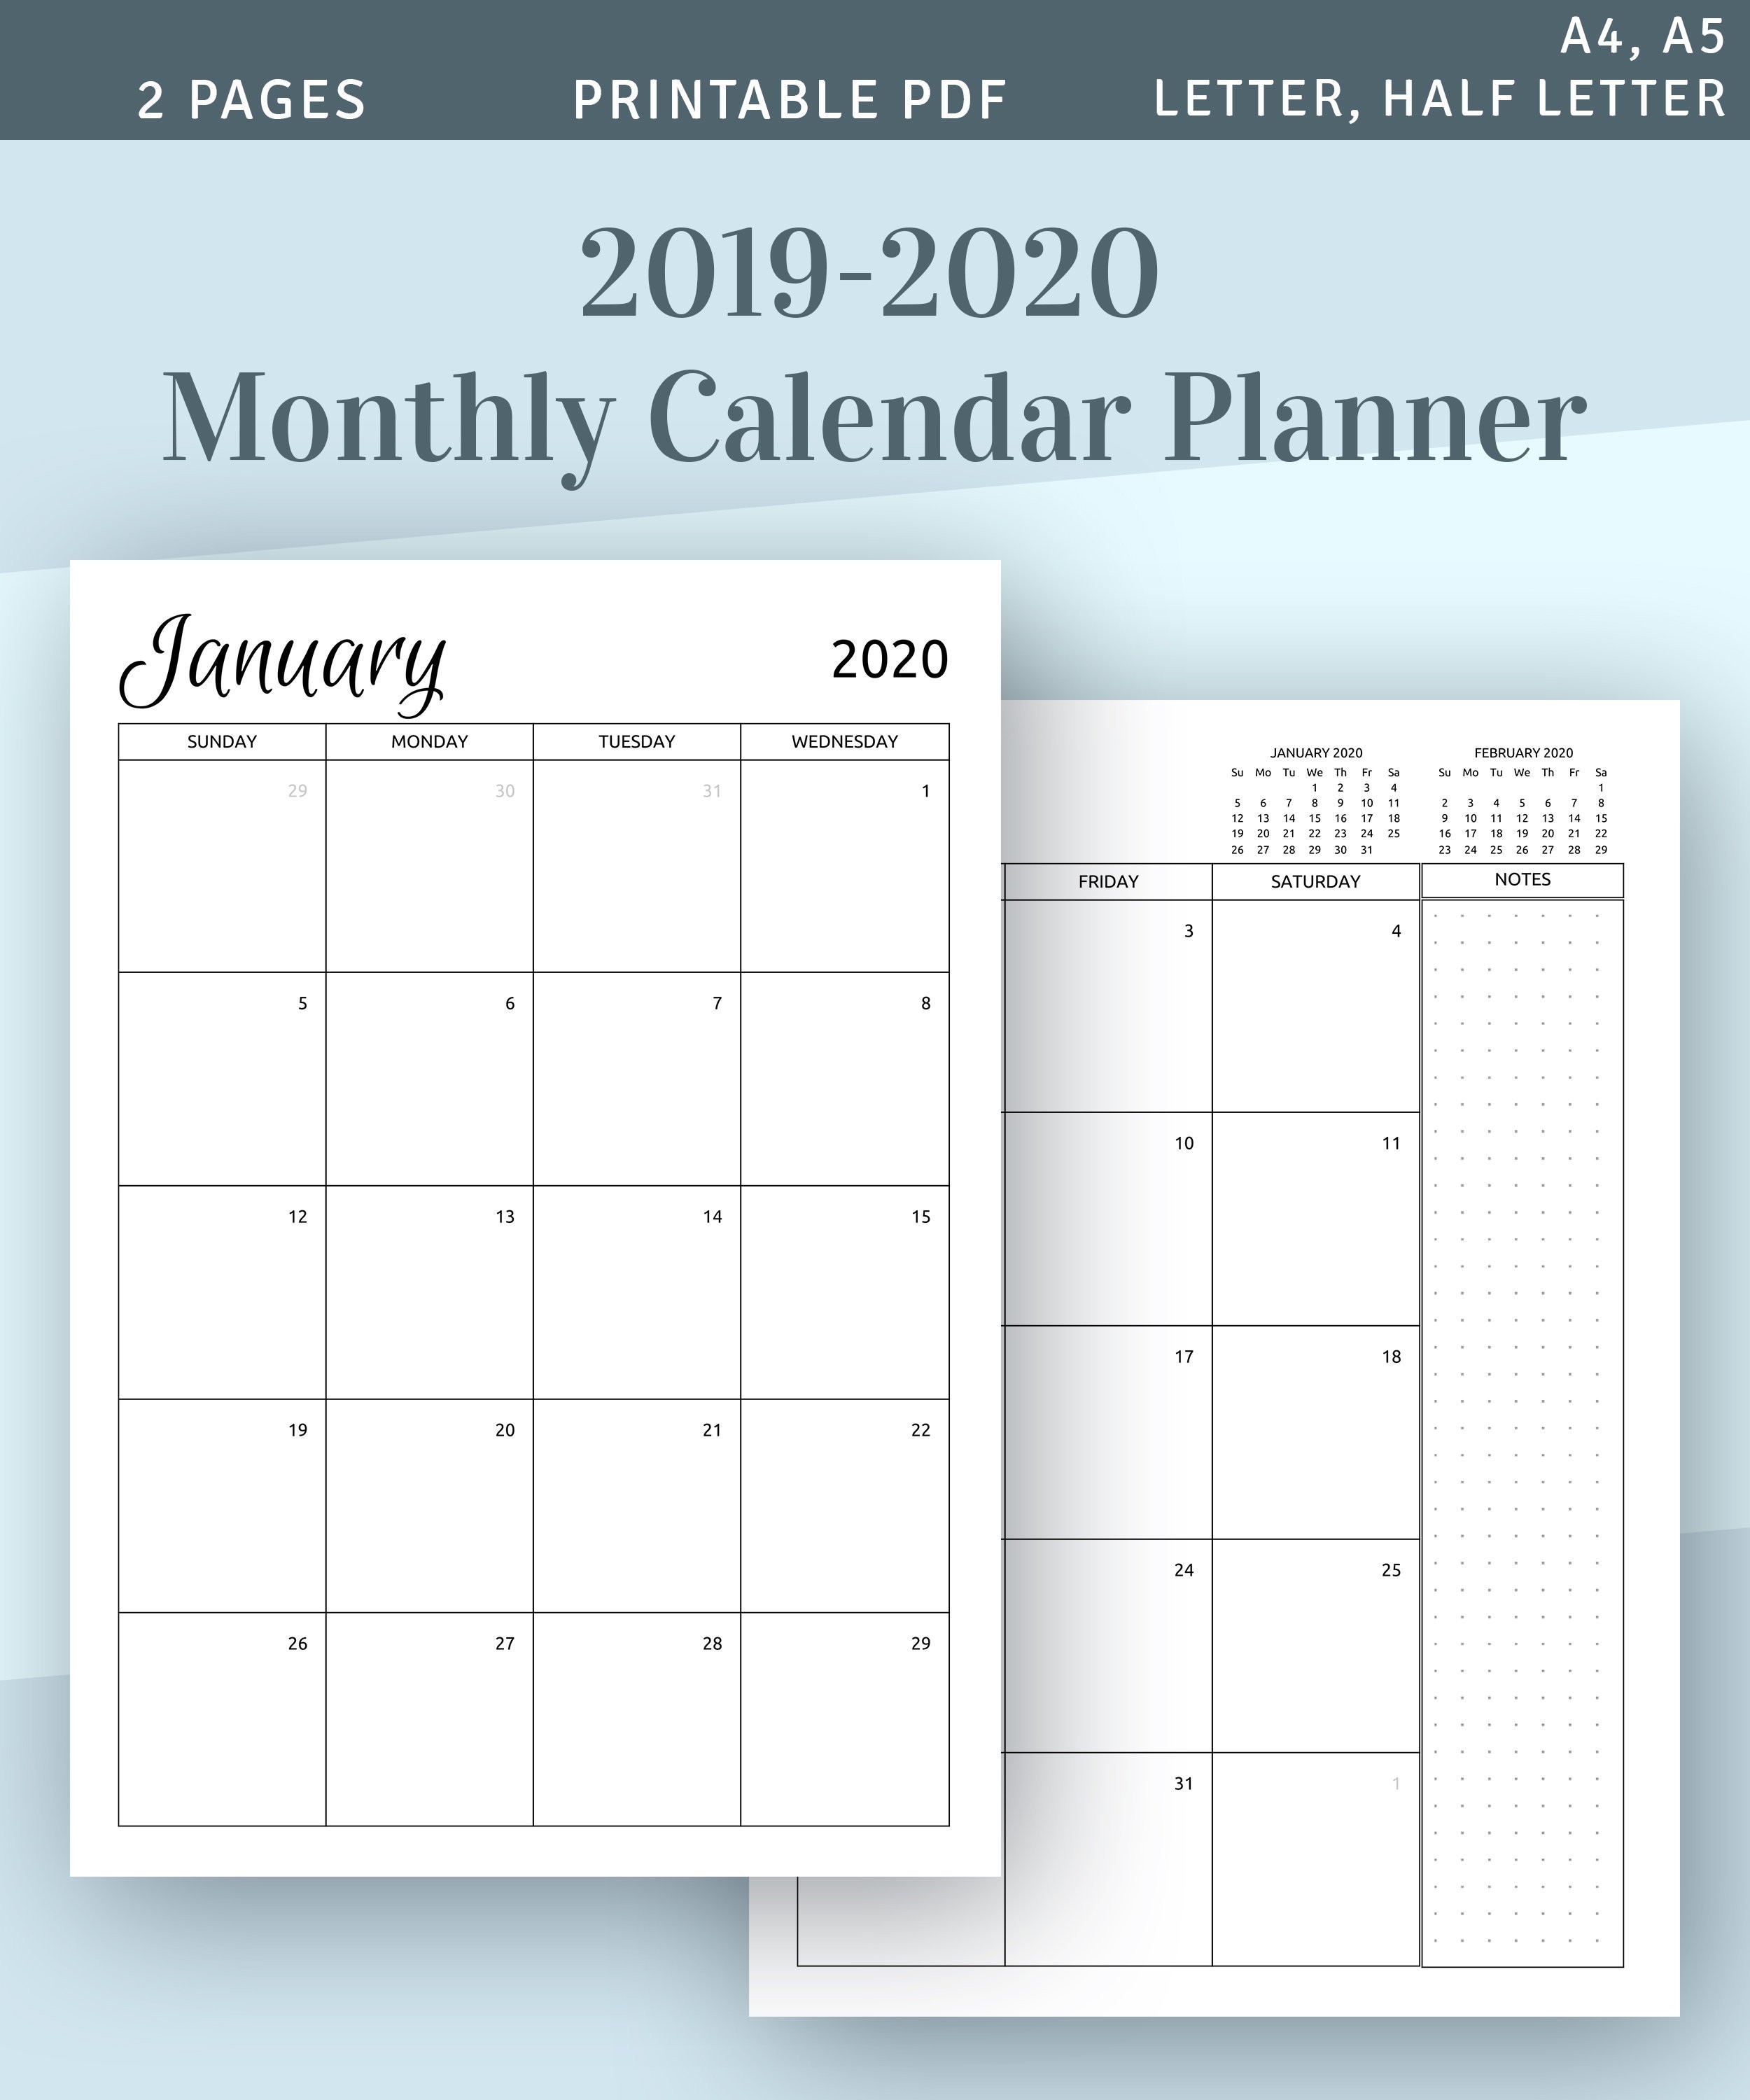 2019 - 2020 Monthly Calendar Printable Template, Download 2019 Calendar  Printable, Two Page Planner Insert Pdf, A4 A5 Letter Size Filofax-Two Page Monthly Calendar 2020